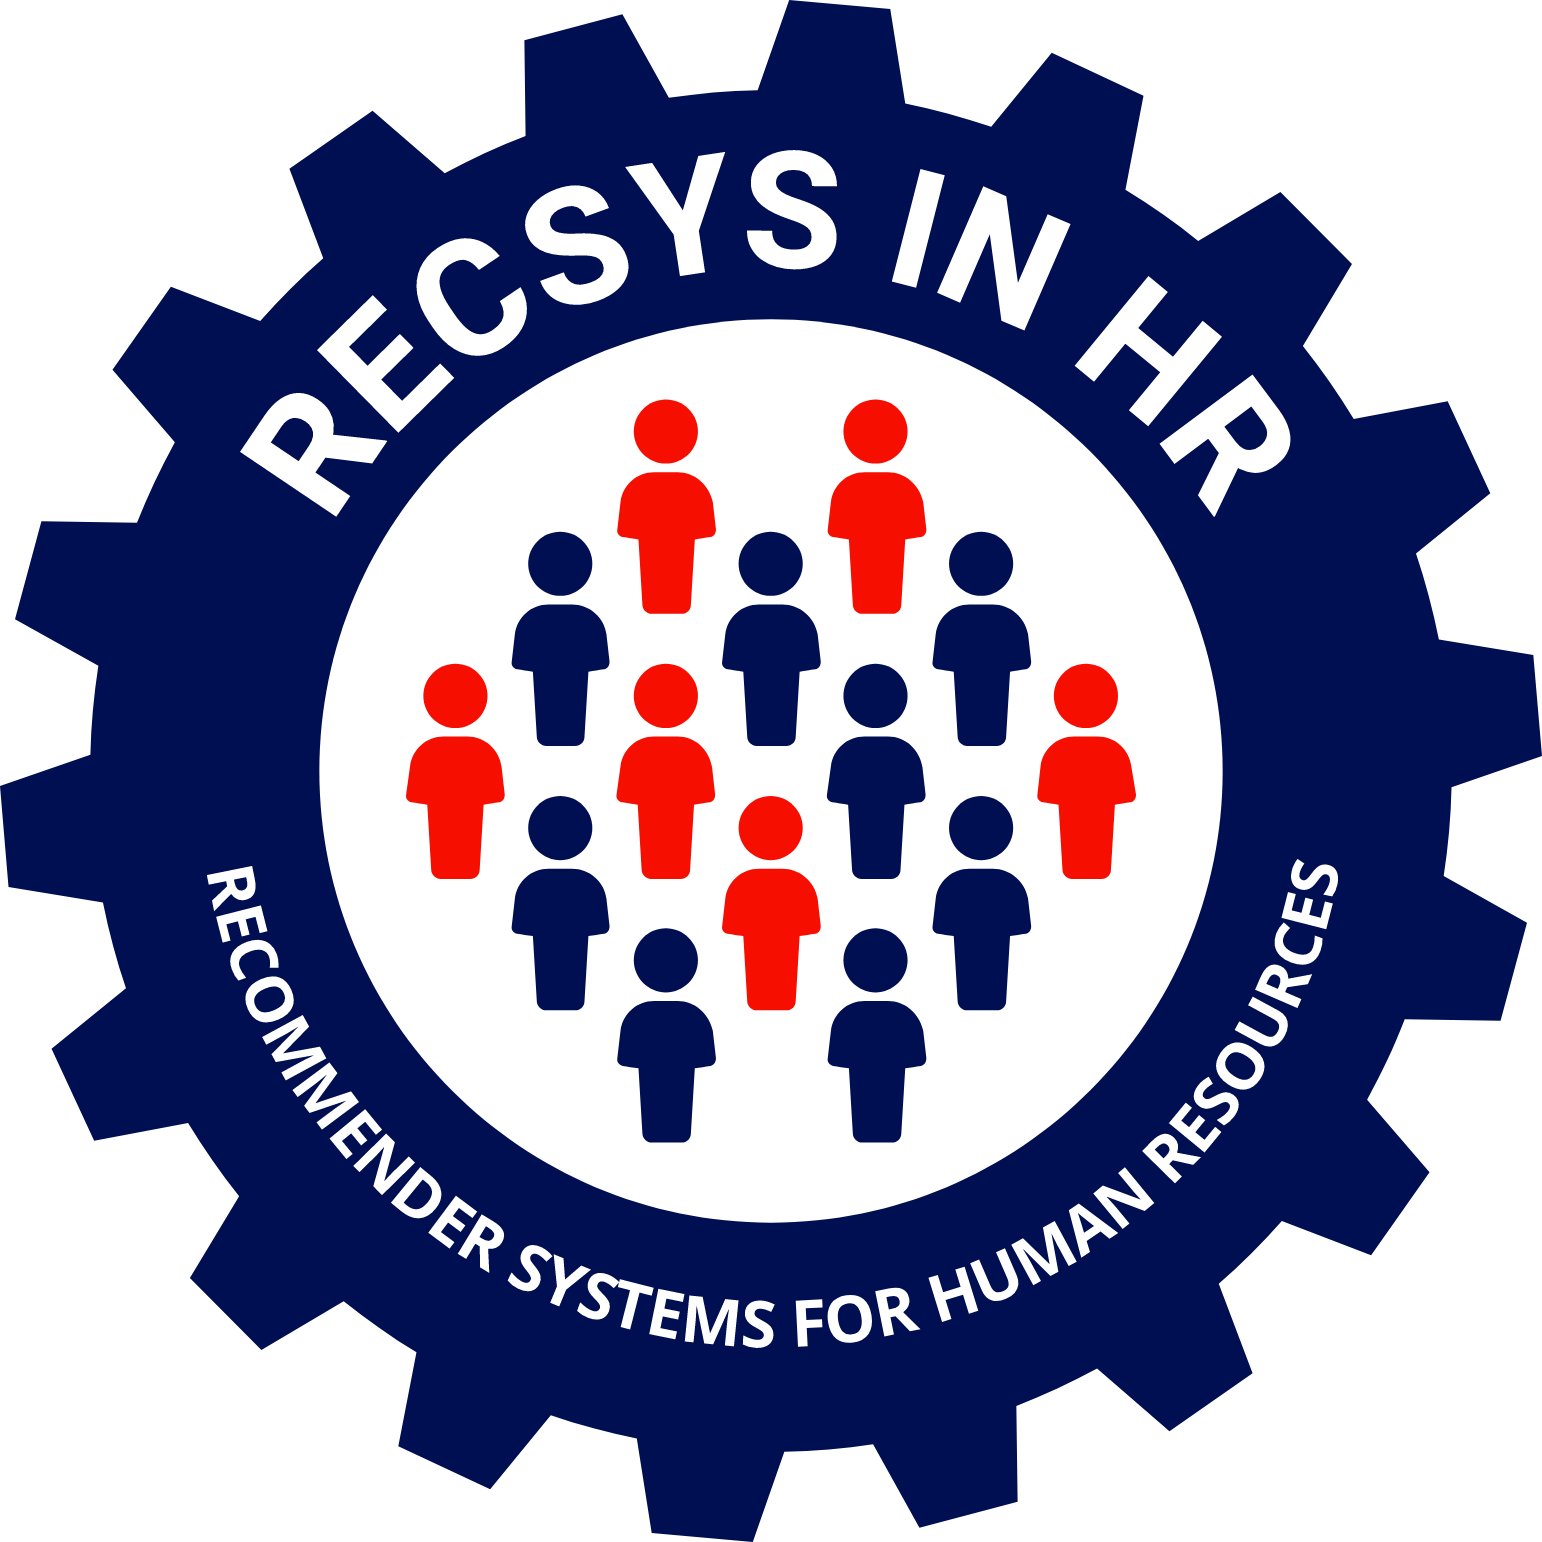 RecSys in HR 2023